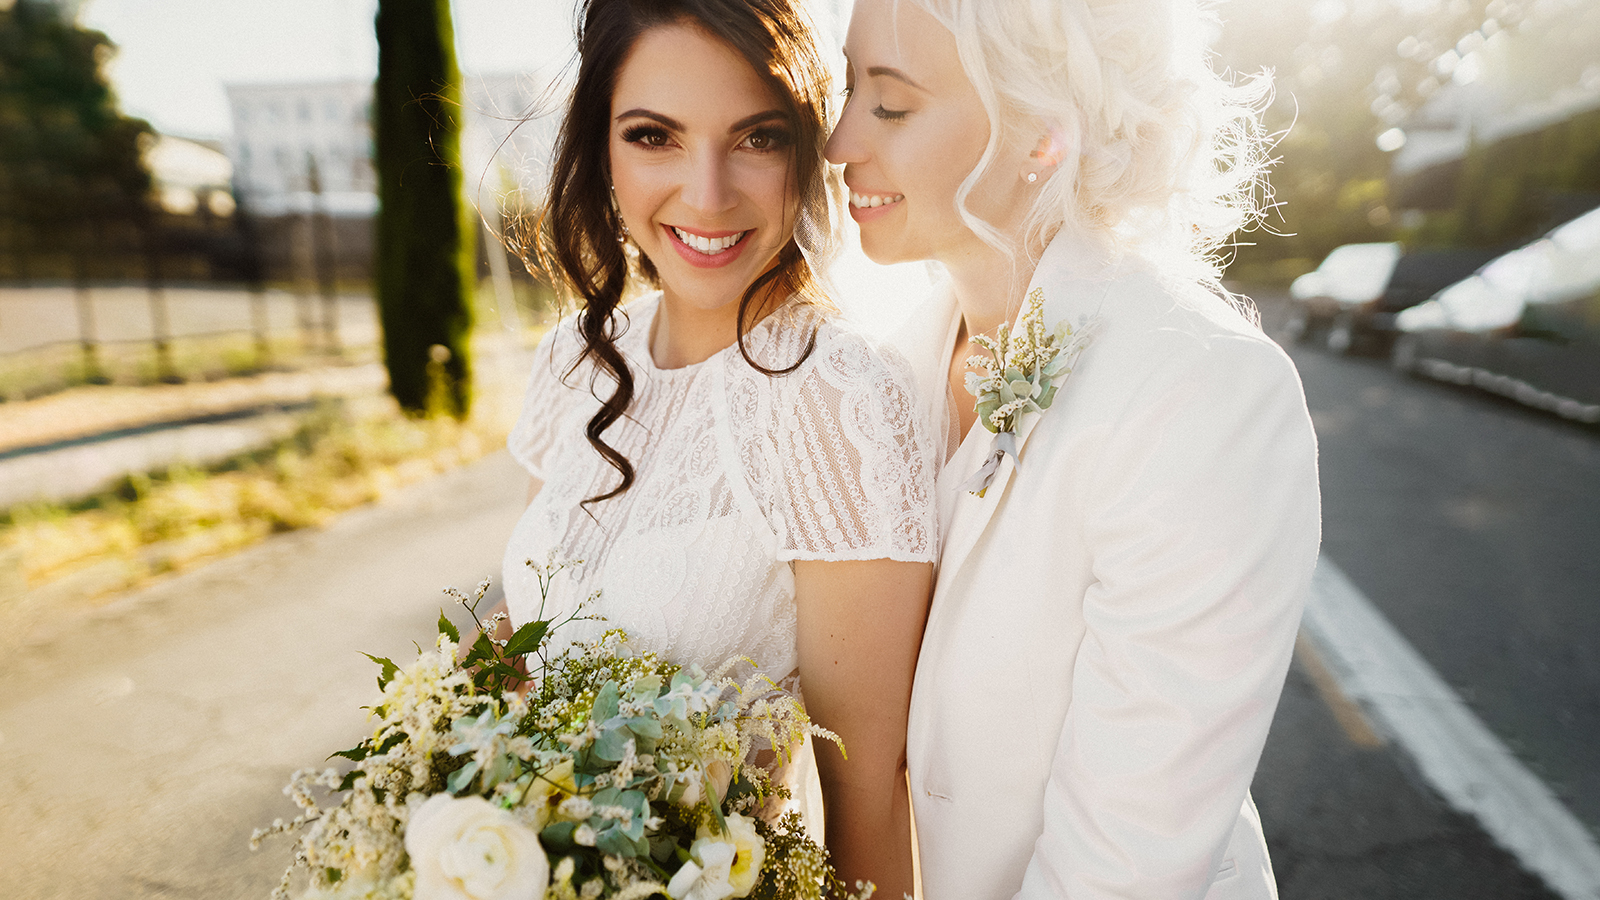 Just married lesbian couple is hugging outdoors and holding big bridal bouquet